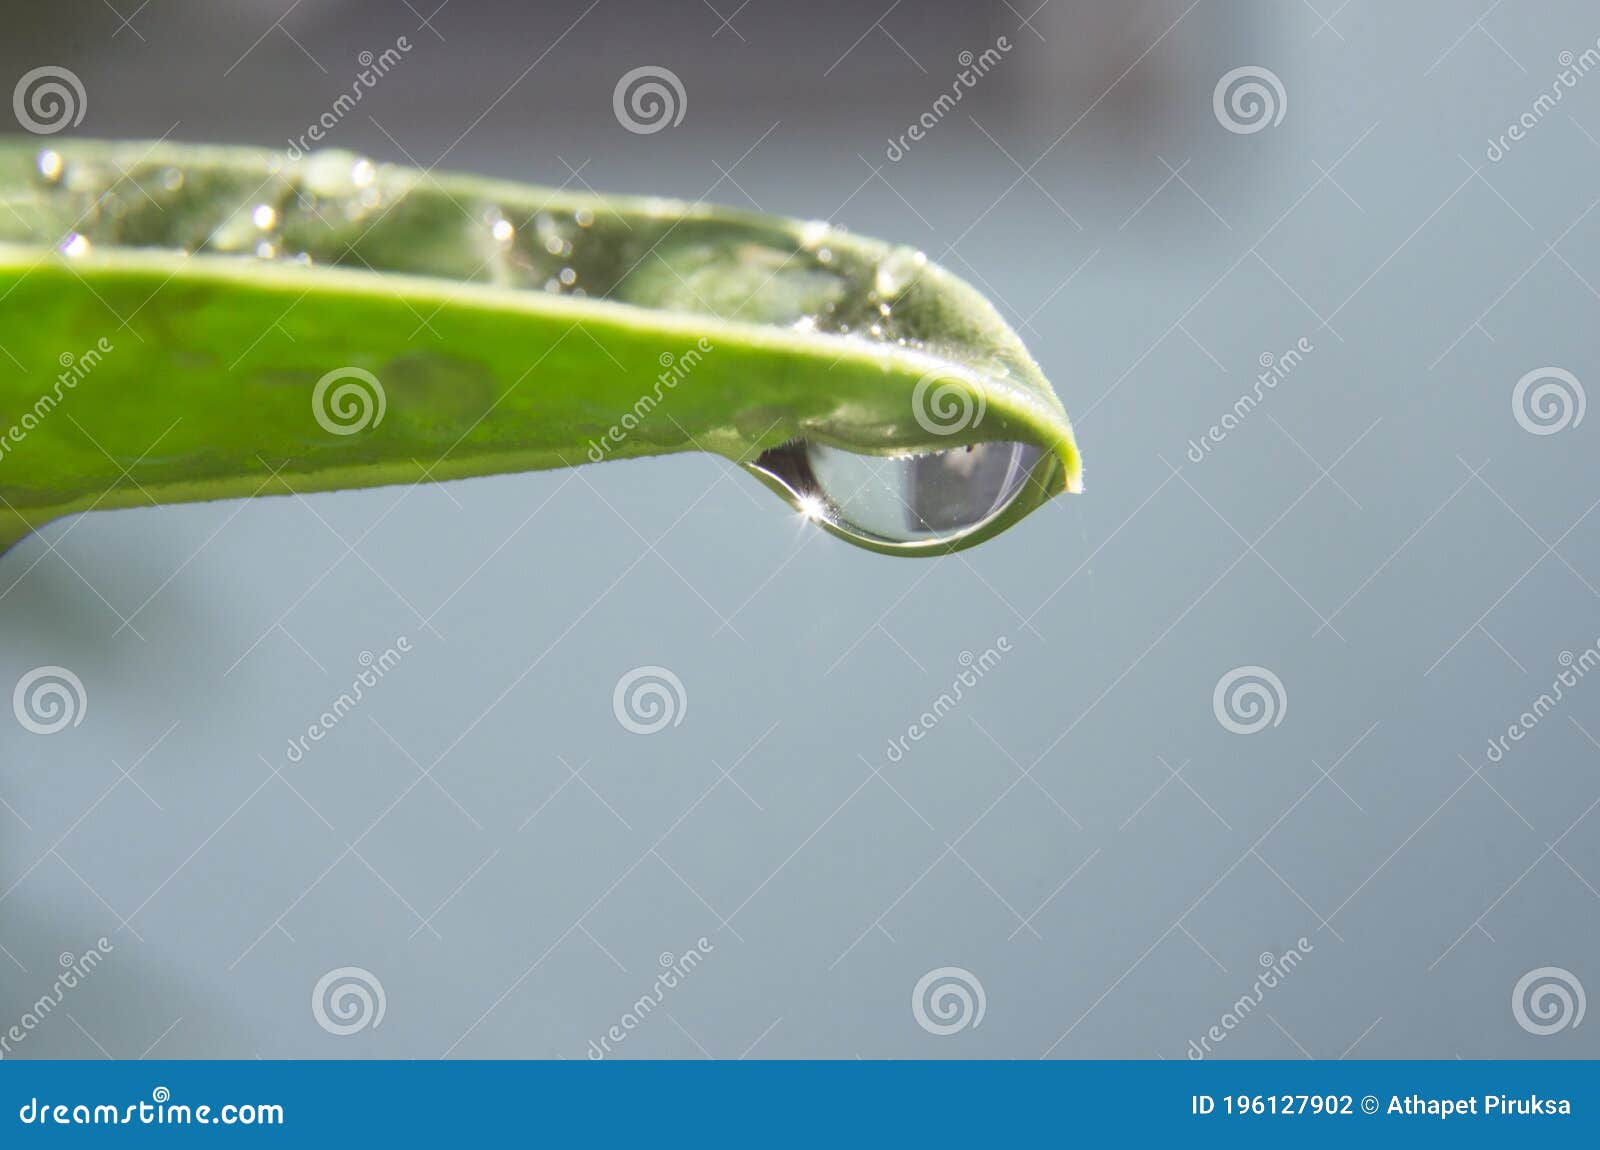 dew drop and light scintillation on the the leaf